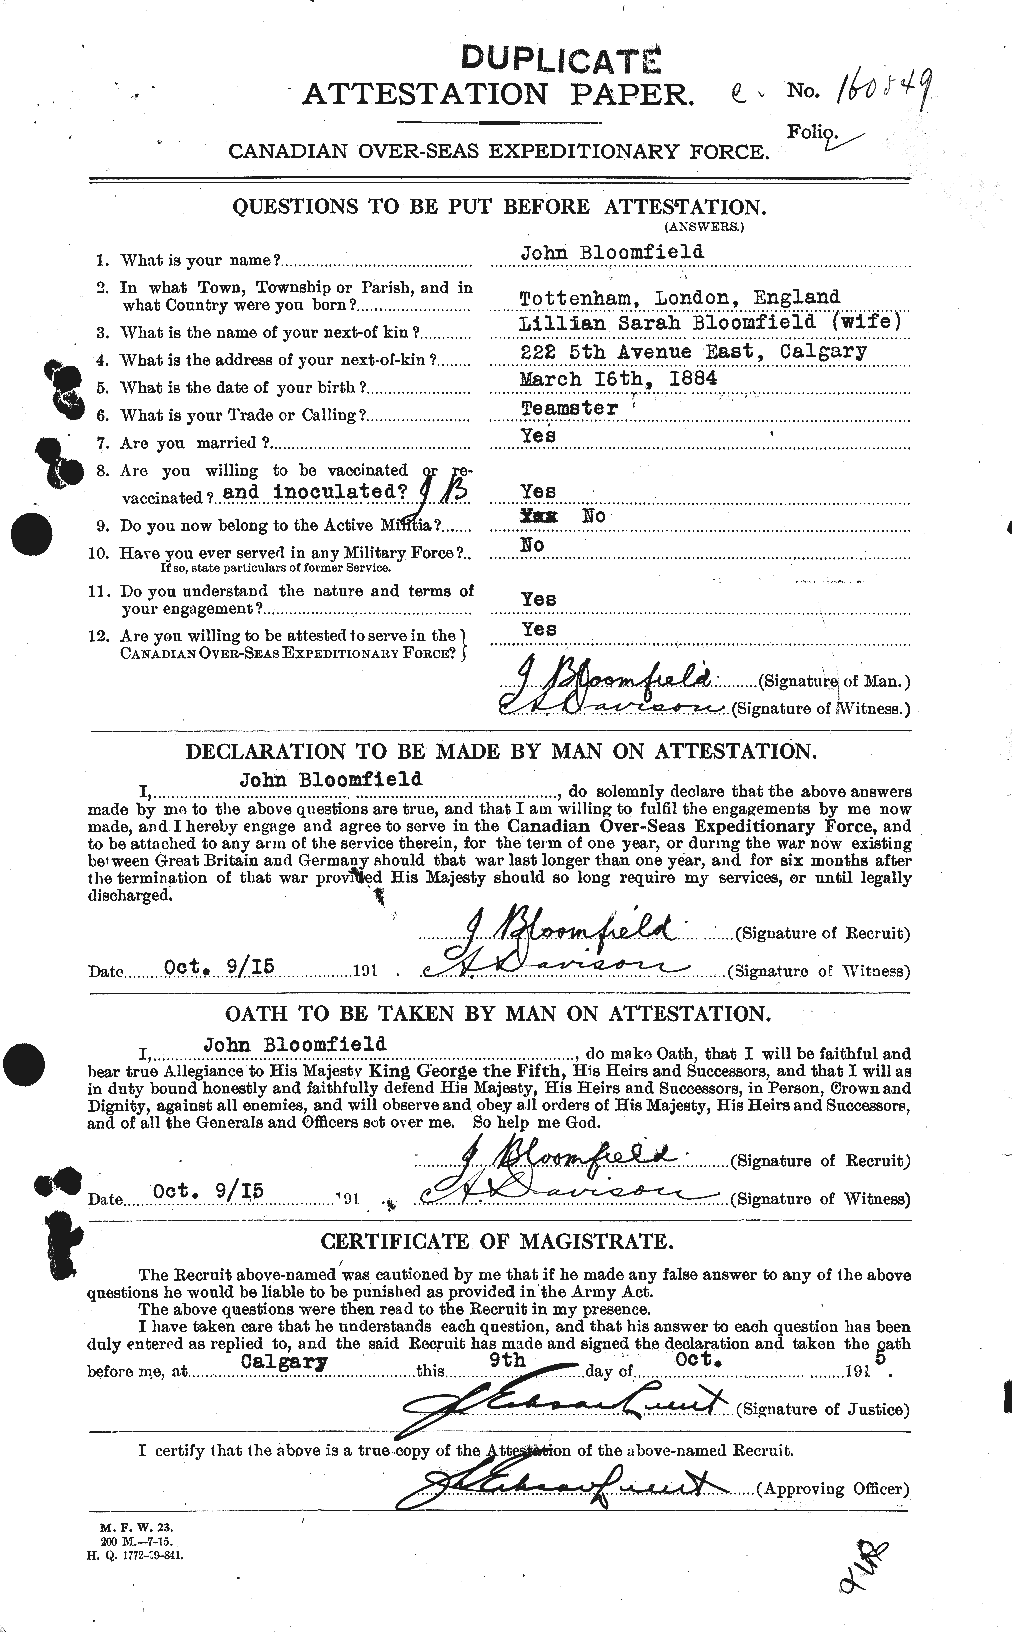 Personnel Records of the First World War - CEF 248624a